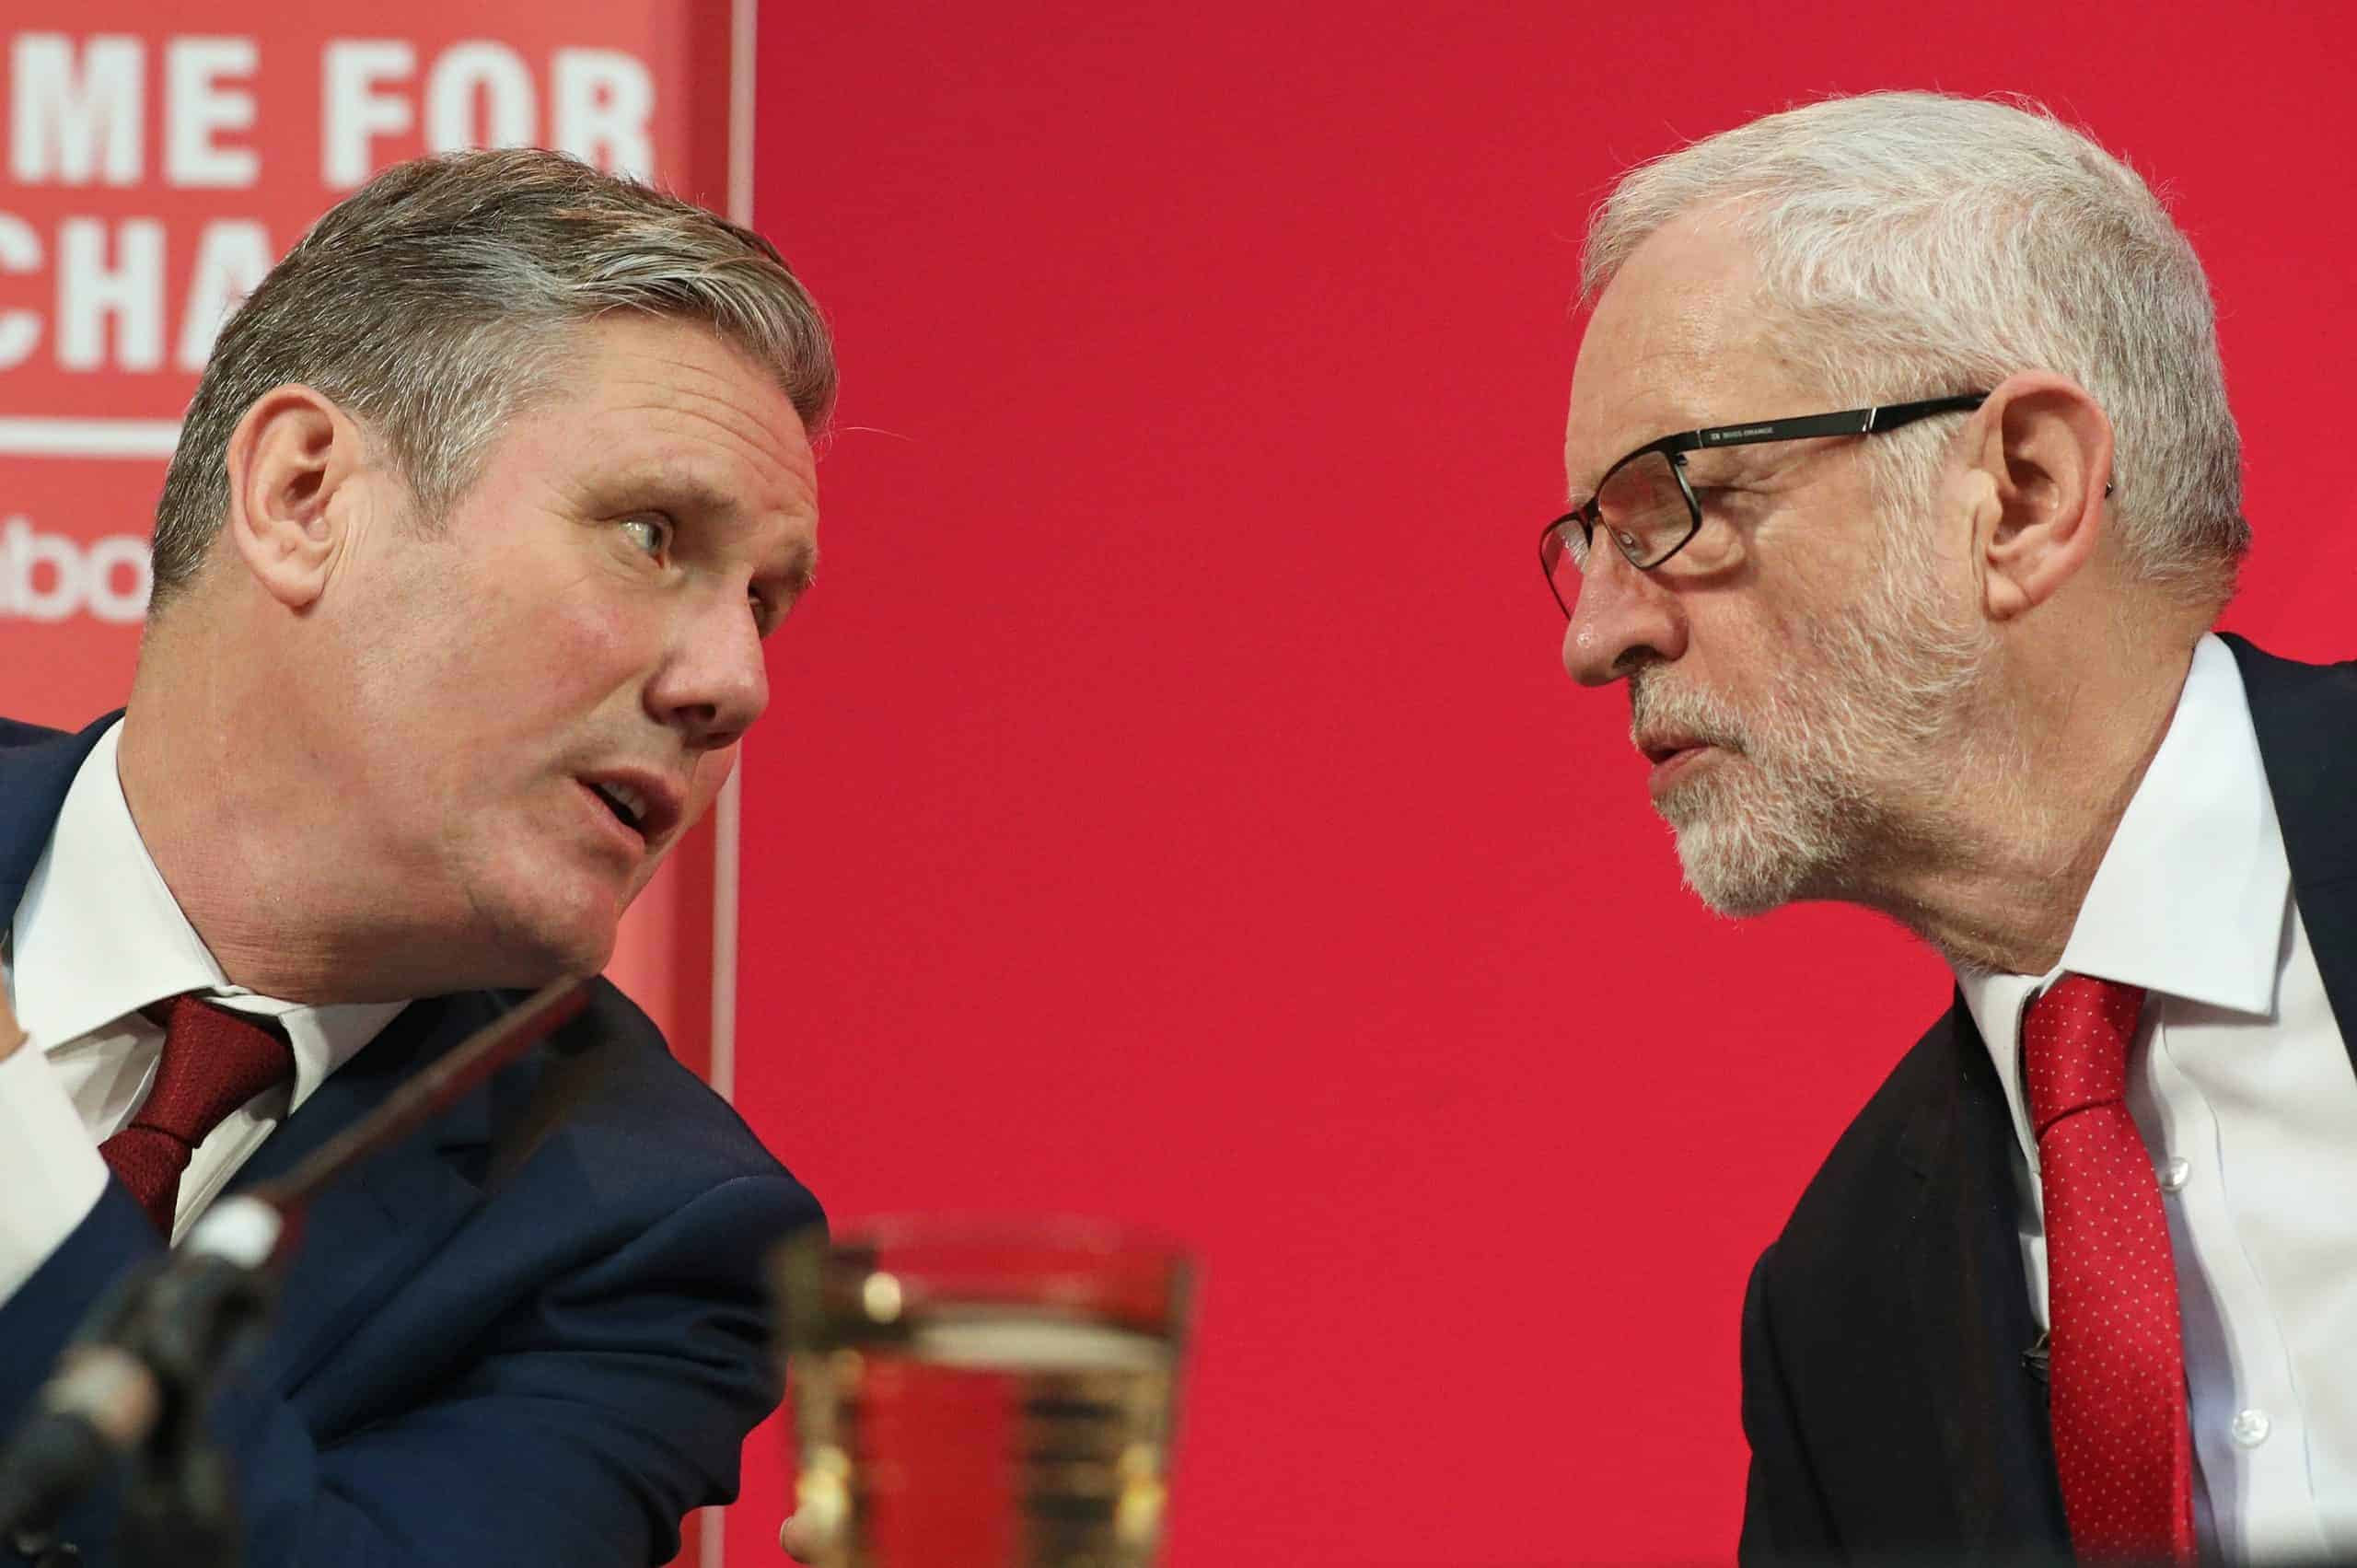 Shadow minister warns Corbyn not to ‘damage’ Keir’s conference